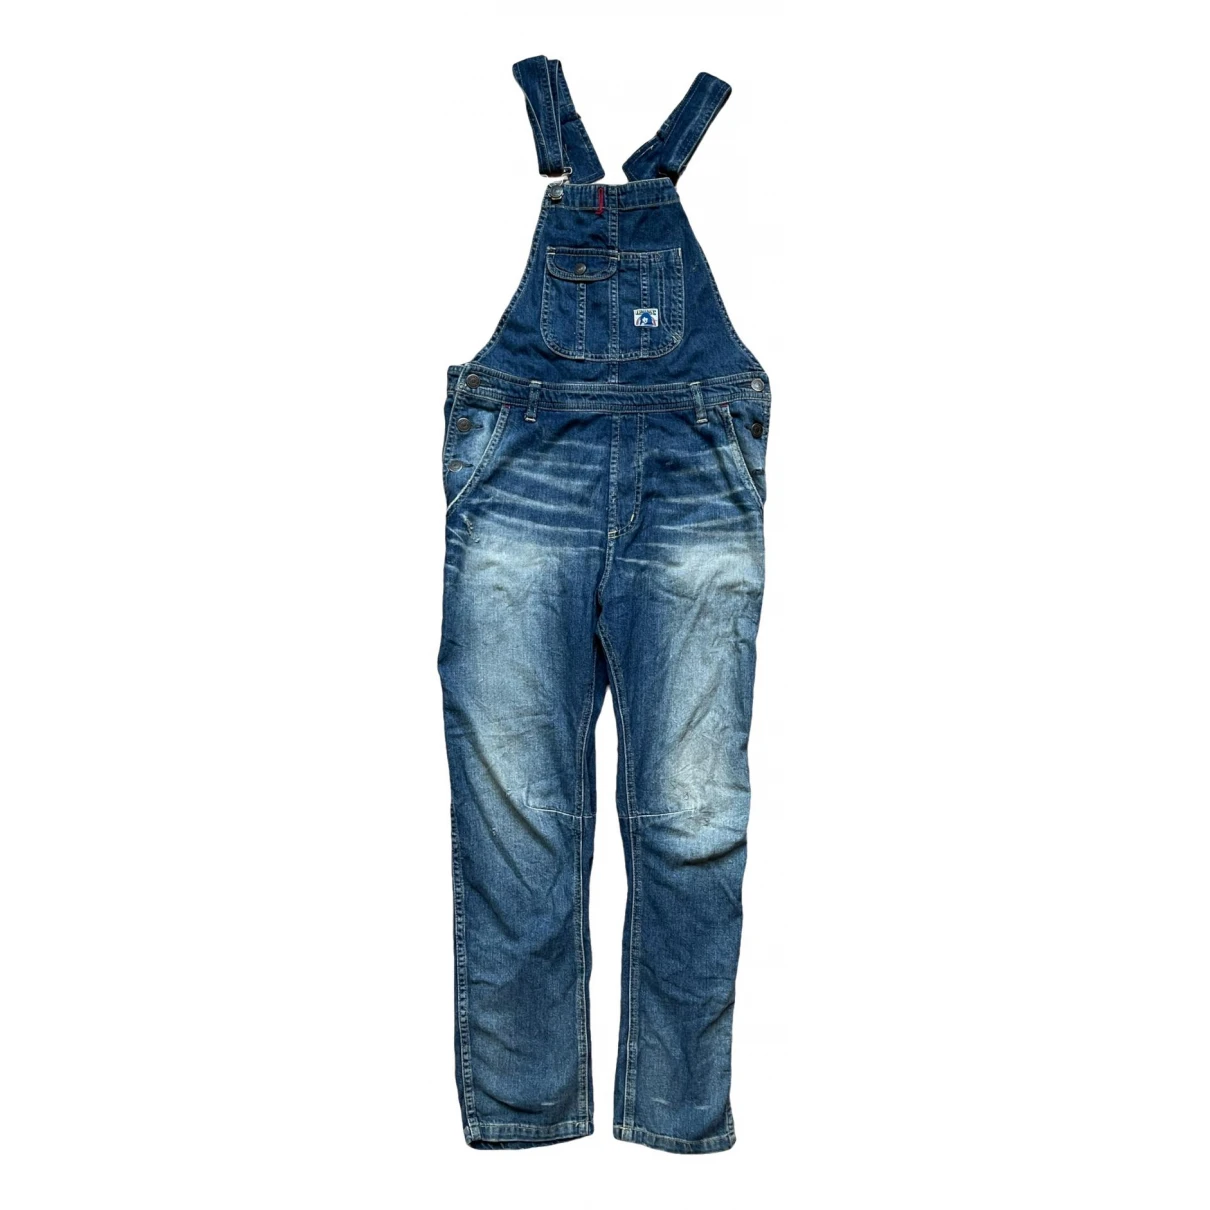 clothing Hysteric Glamour jumpsuits for Female Denim - Jeans S International. Used condition